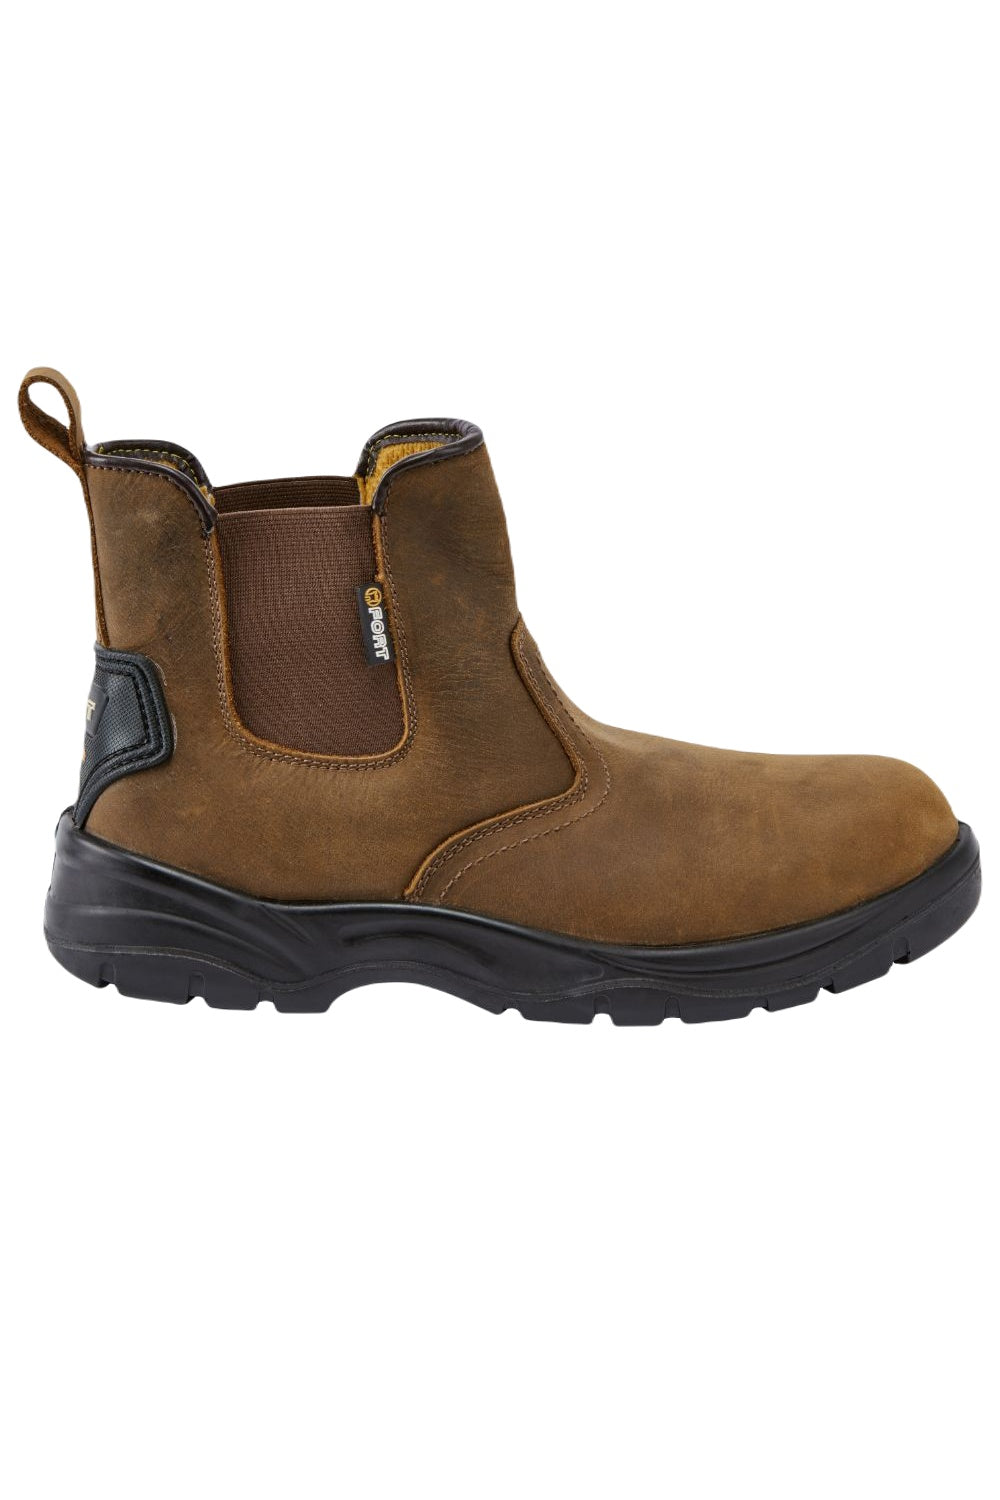 Fort Regent Safety Boot in Brown